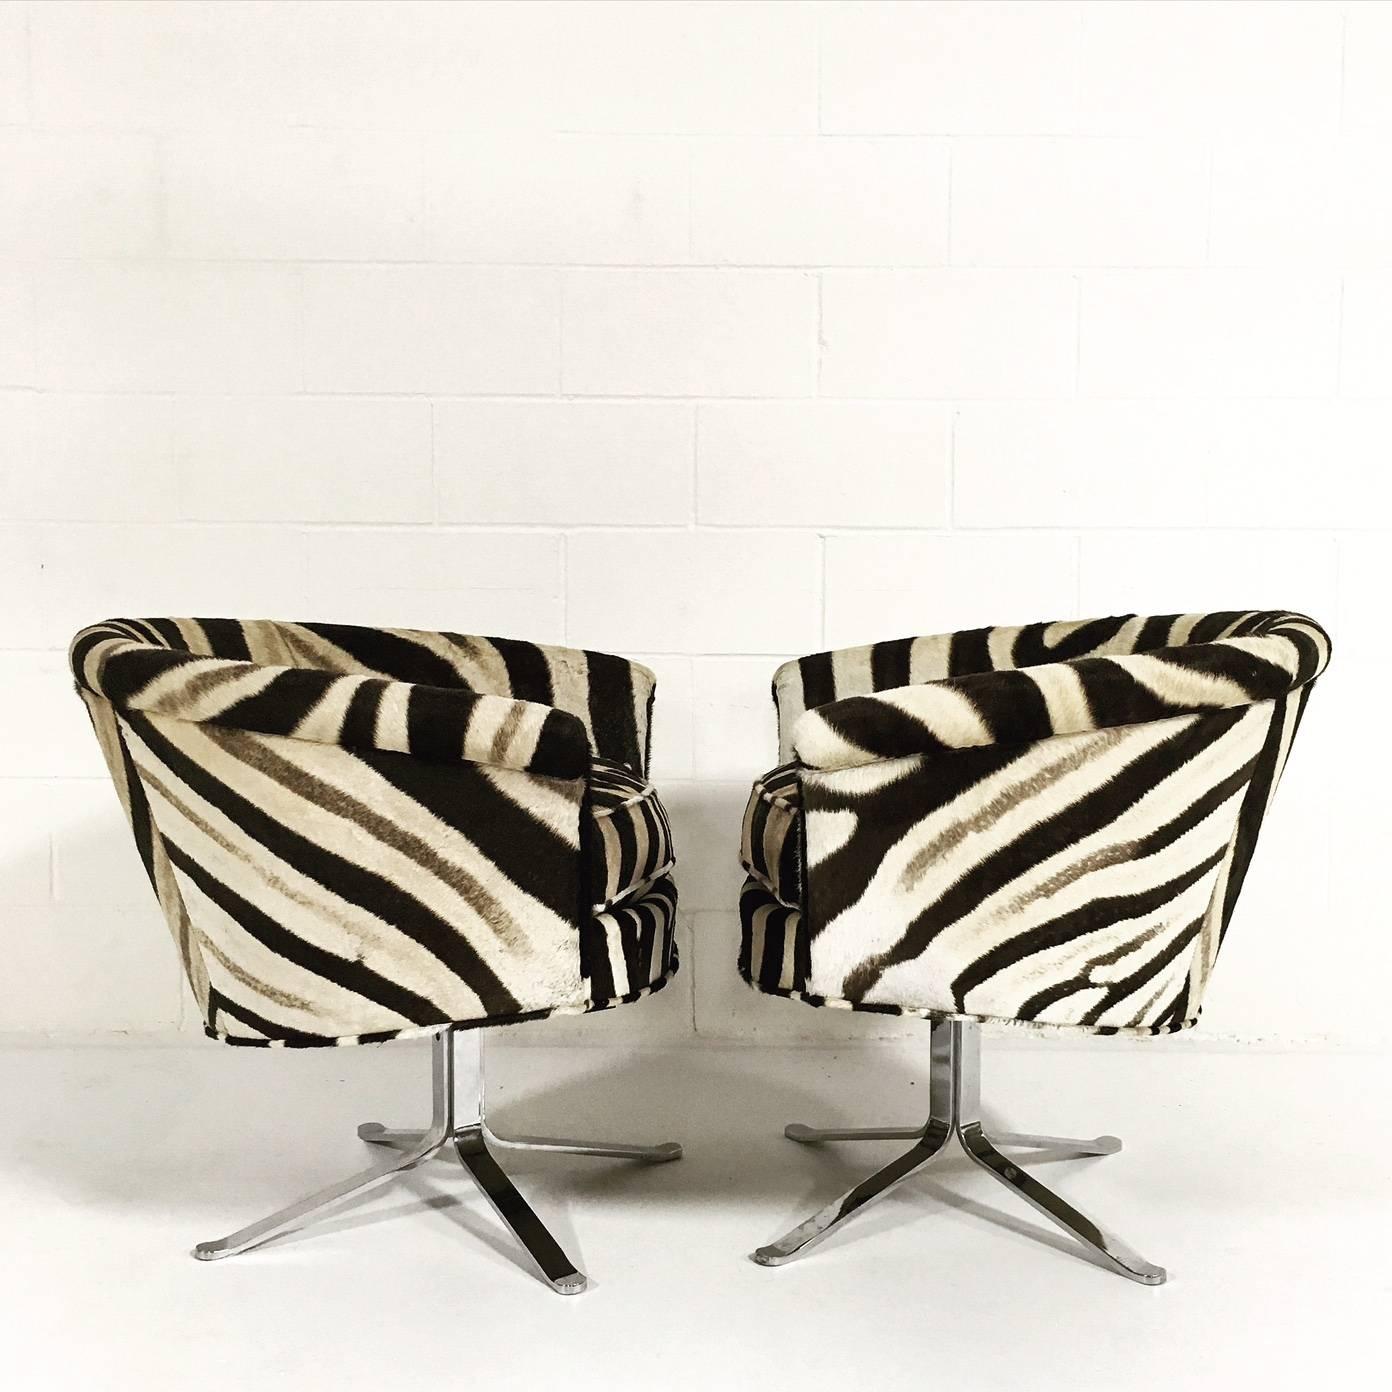 20th Century Pair of Swivel Chairs in Zebra Hide by Pace, in the manner of I.M. Rosen